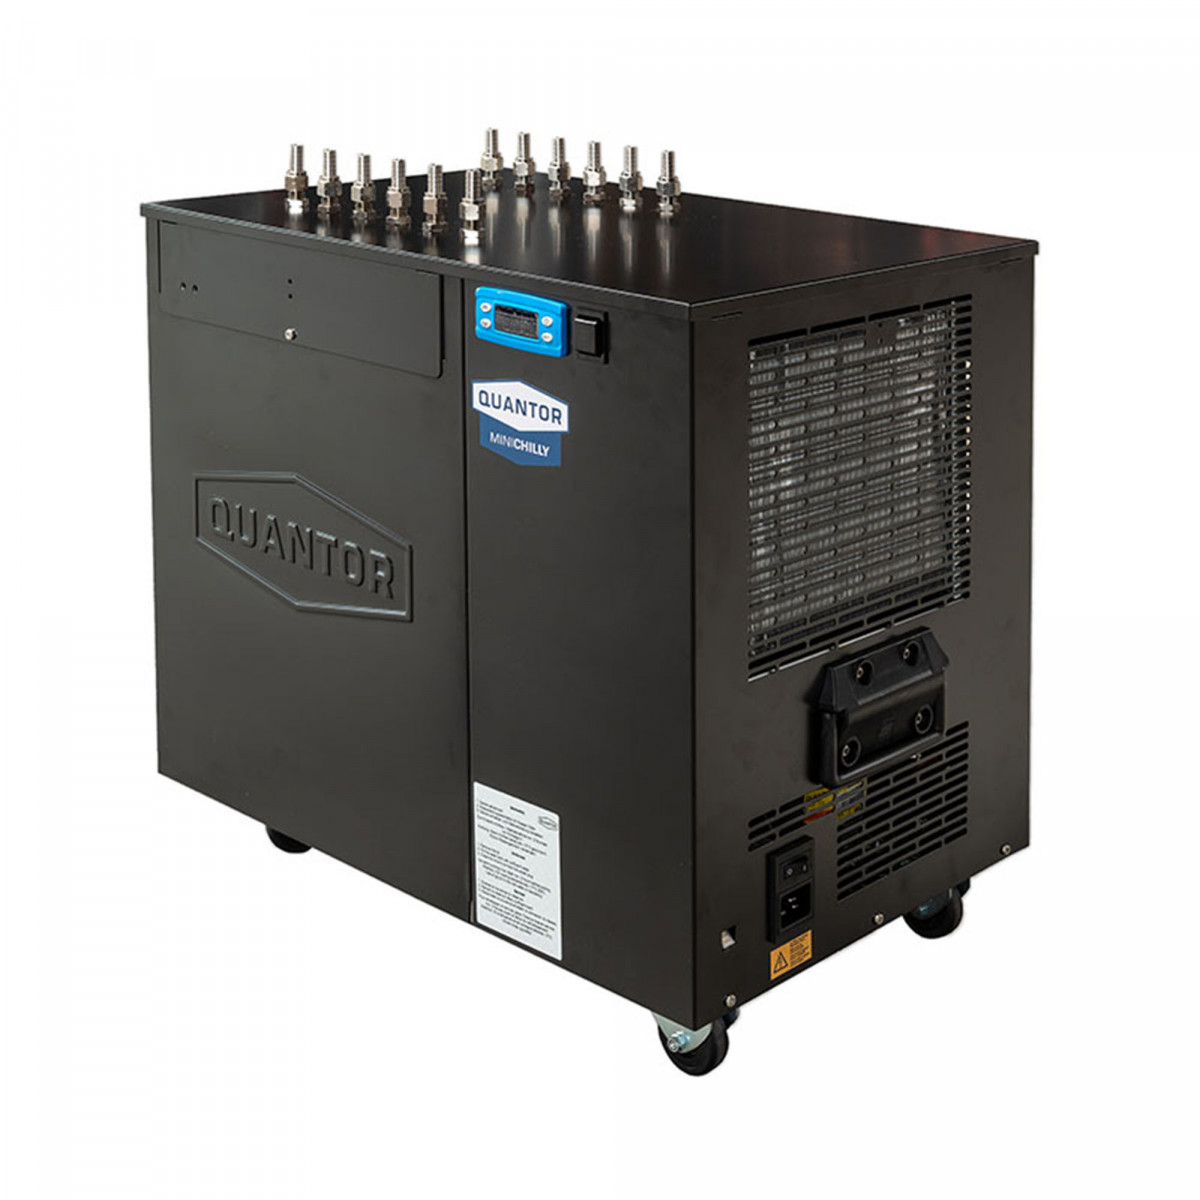 Quantor MiniChilly Glycol Chiller black 0.5 kW - 2/3 HP